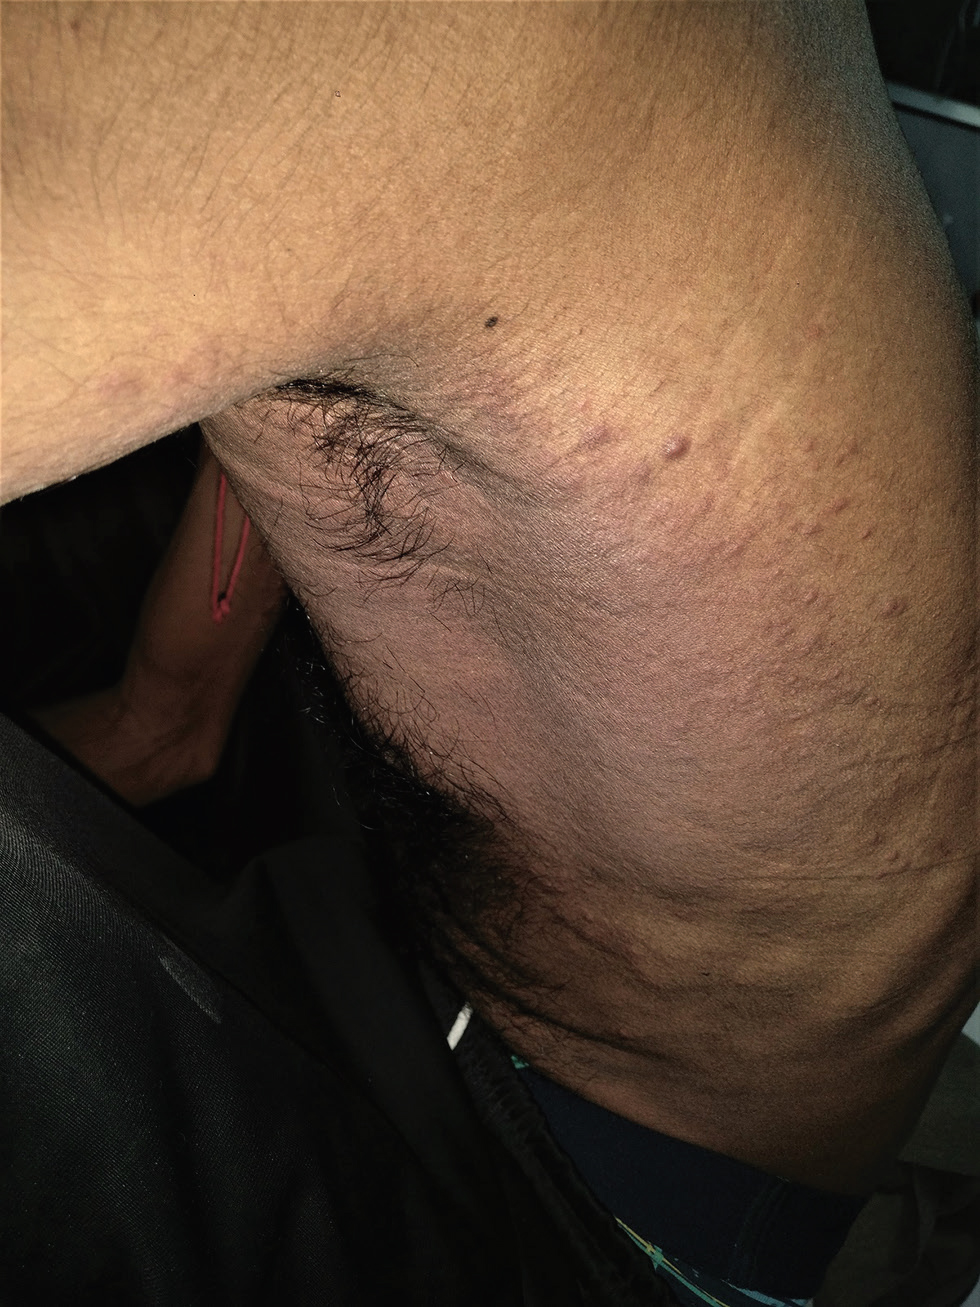 Fig. 3 Case 2: Diffuse erythema and edema over left infra-axillary region extending posteriorly with multiple overlying erythematous papules and plaques are seen.